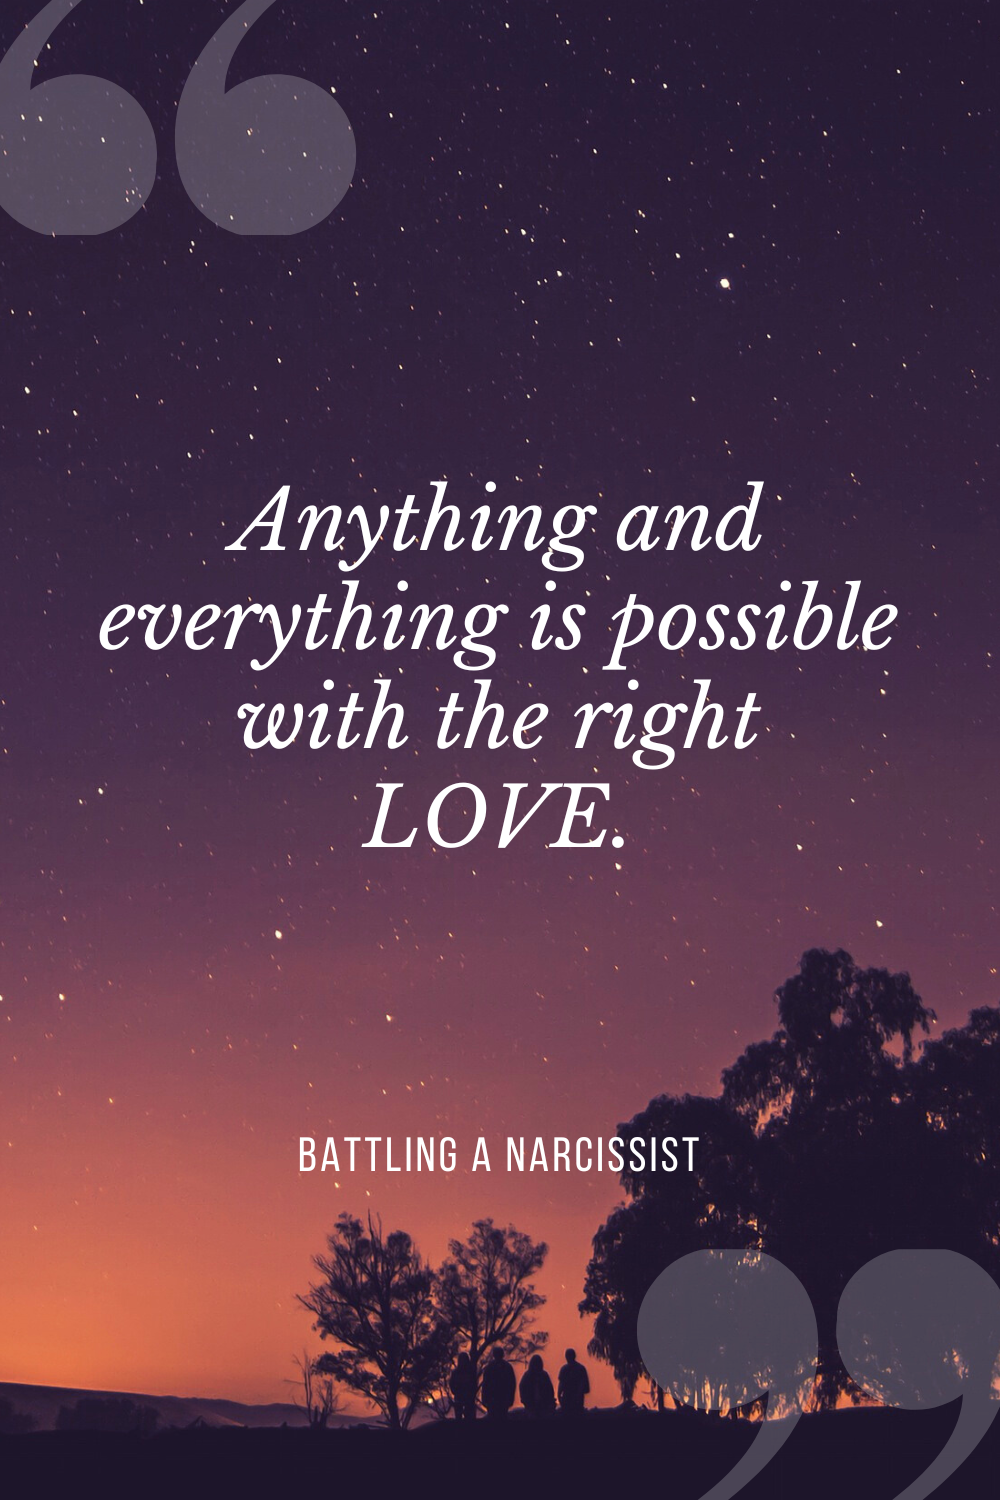 Anything and everything is possible with the right love.